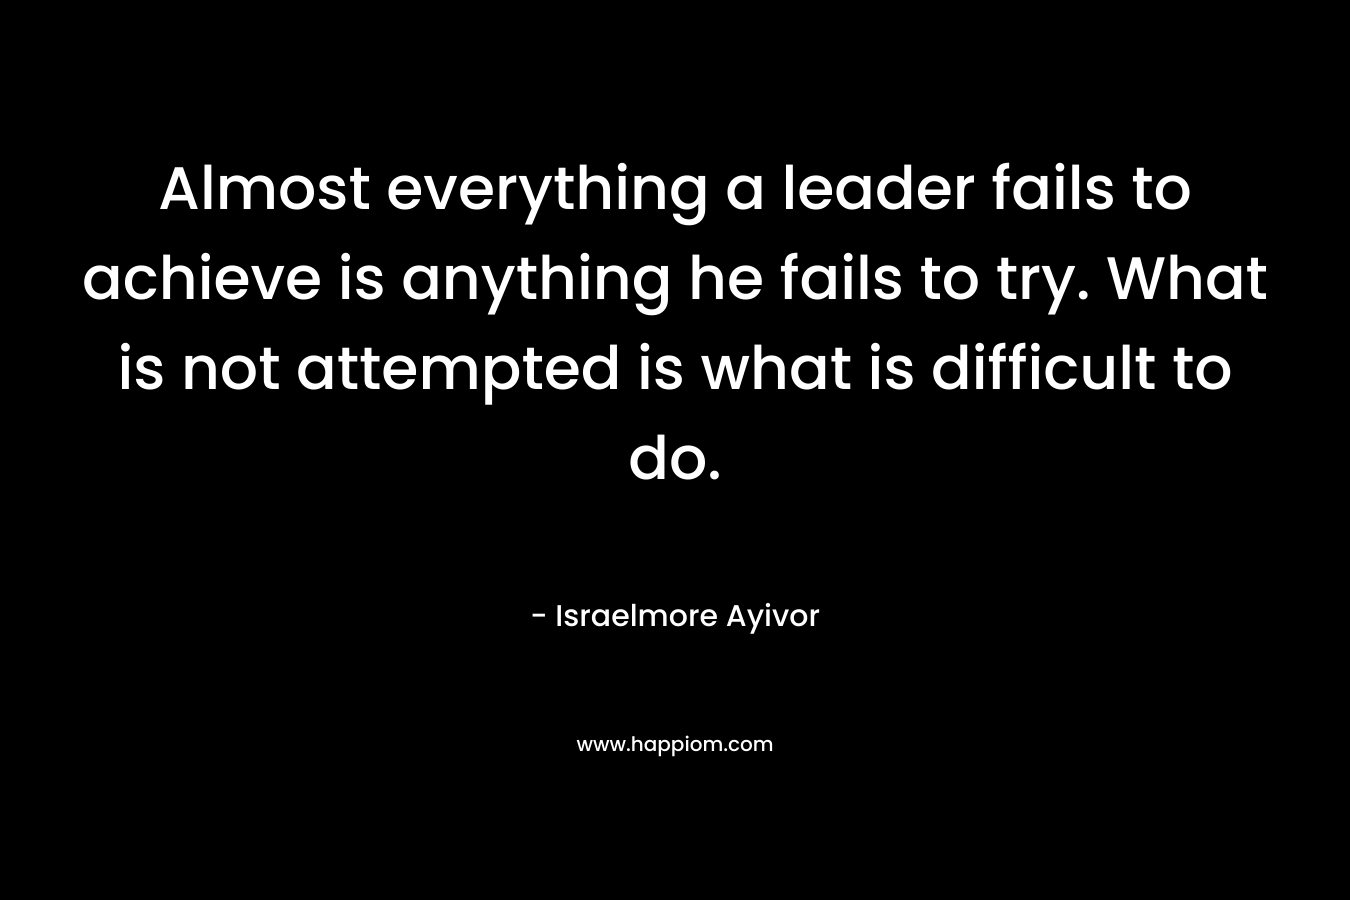 Almost everything a leader fails to achieve is anything he fails to try. What is not attempted is what is difficult to do. – Israelmore Ayivor